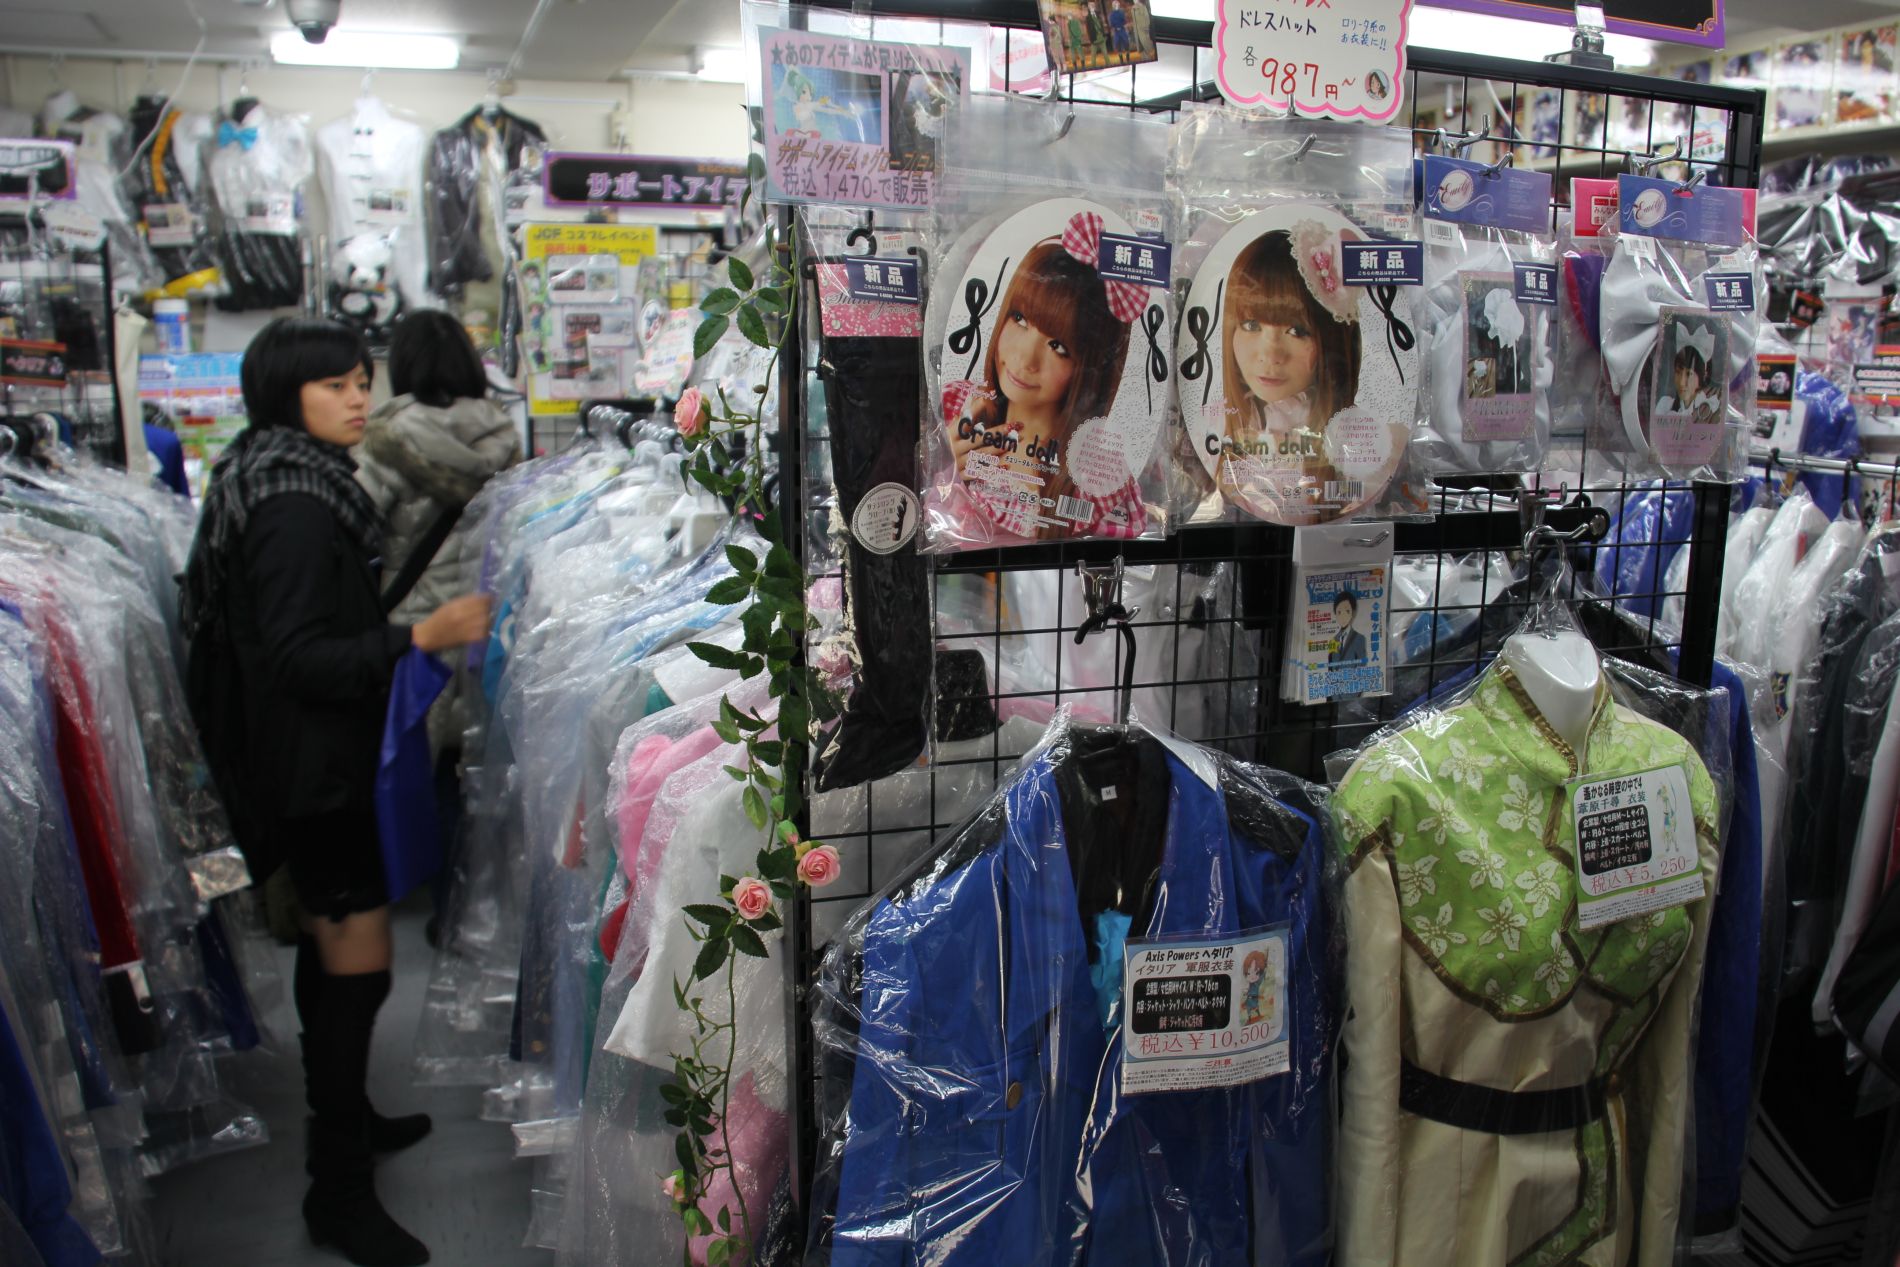 A cosplay girl browses for costumes on Otome Road in Tokyo, Japan.